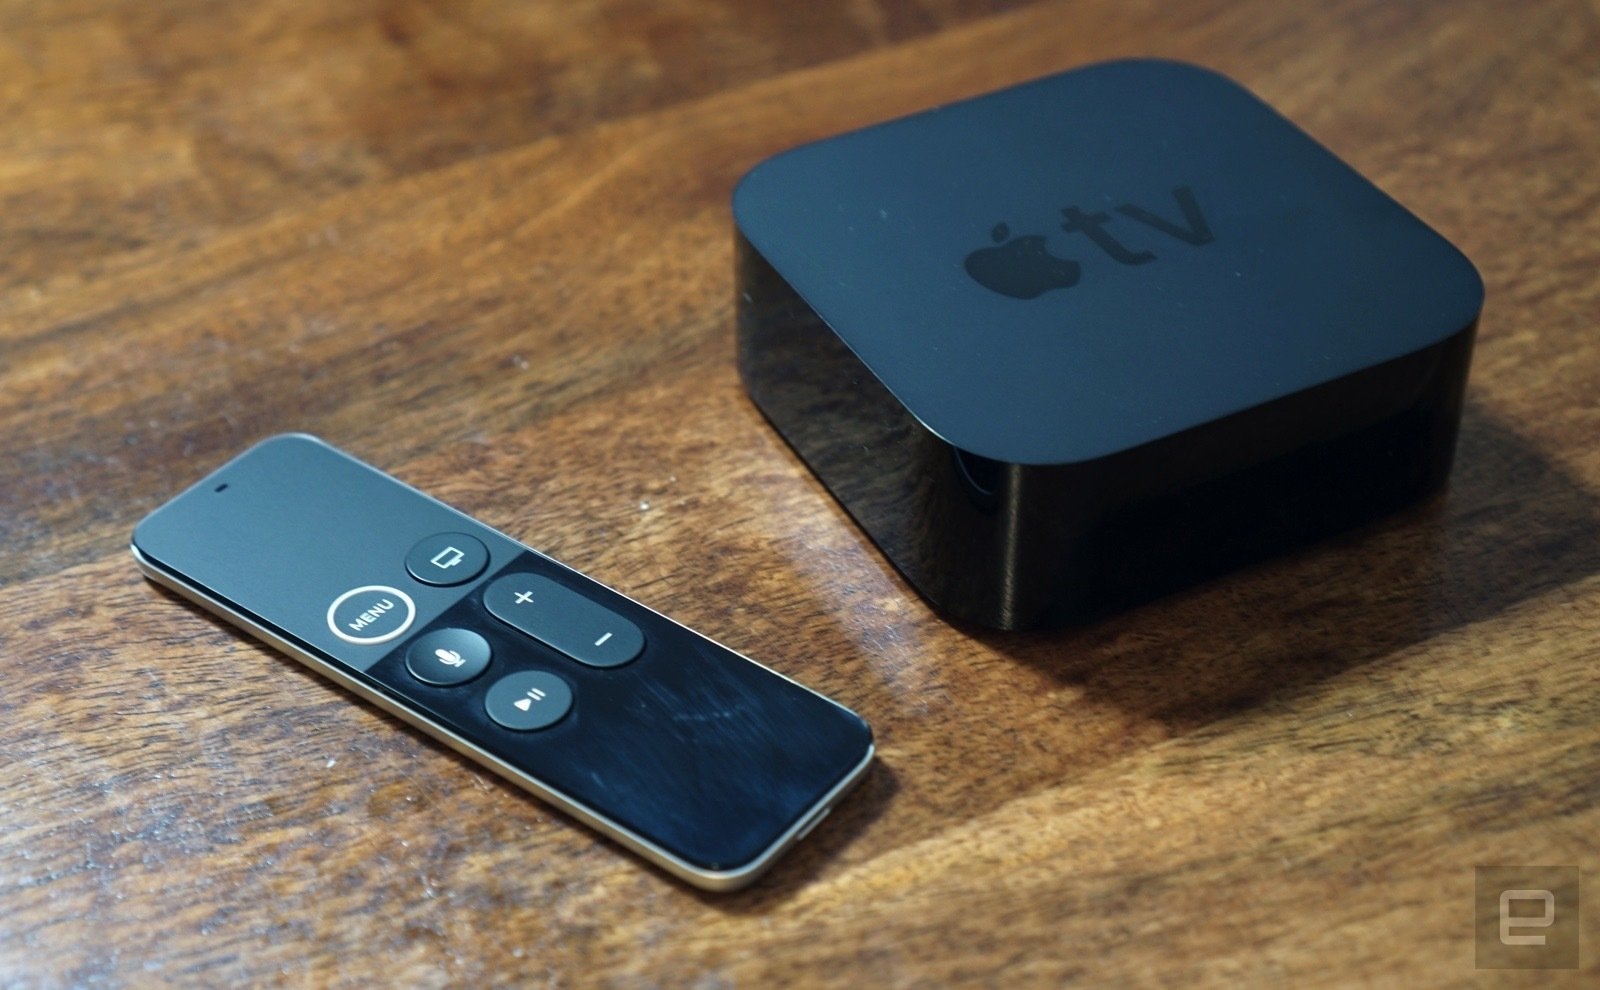 Amazon Prime Video's X-Ray feature finally comes to Apple TV | DeviceDaily.com